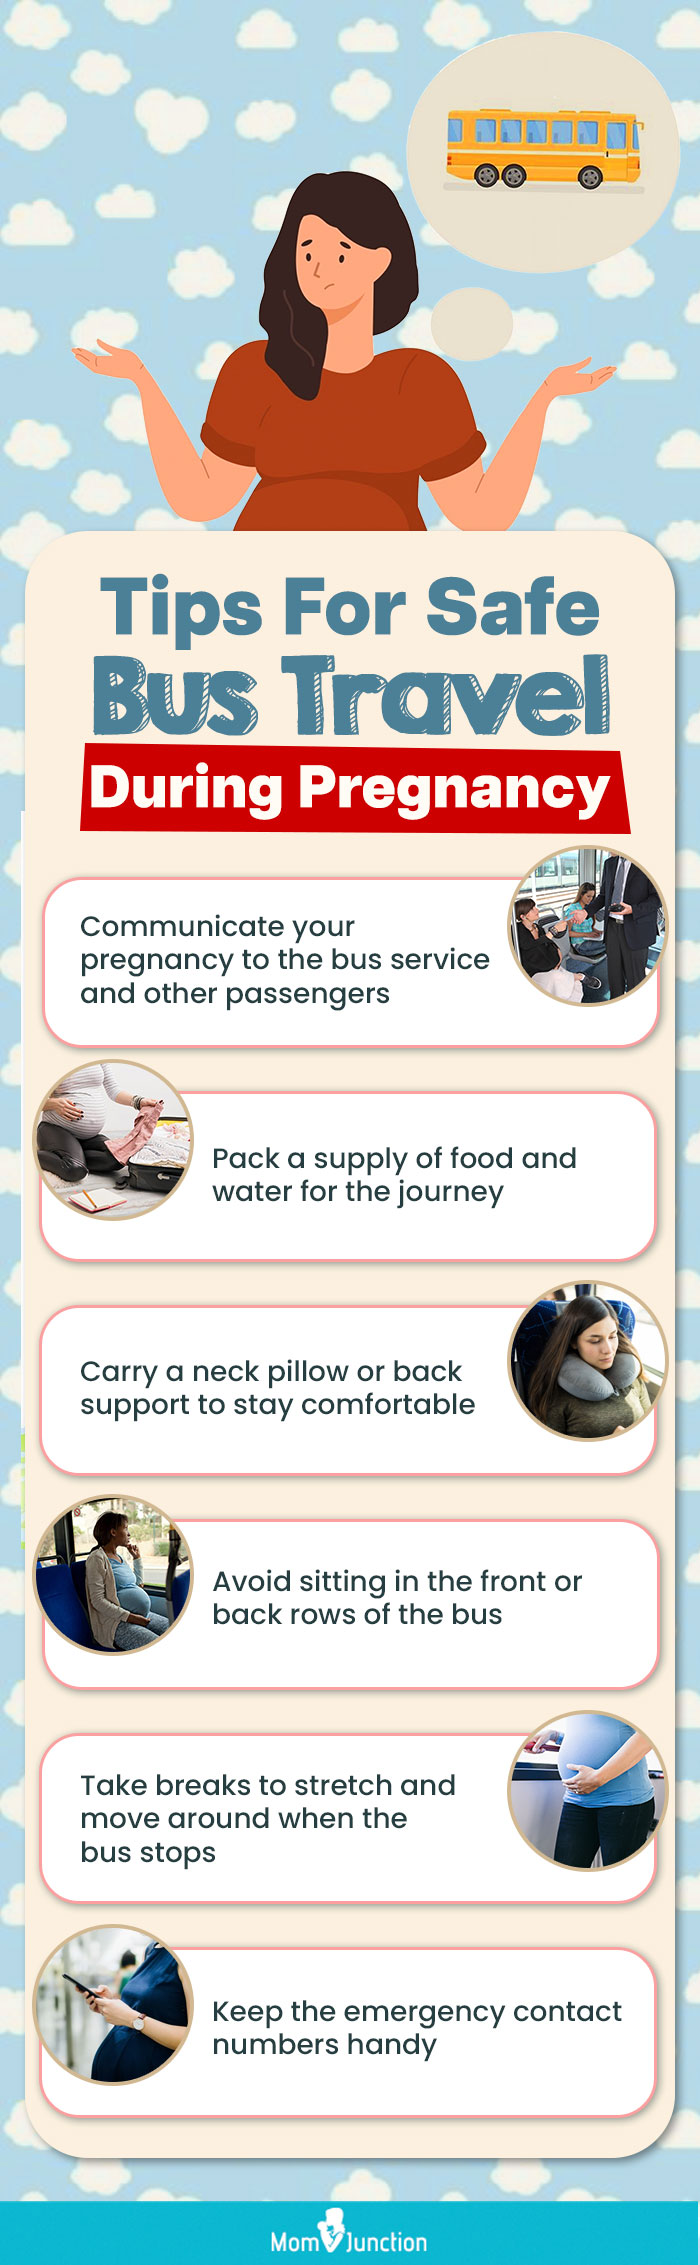 tips for dafe travel (infographic)